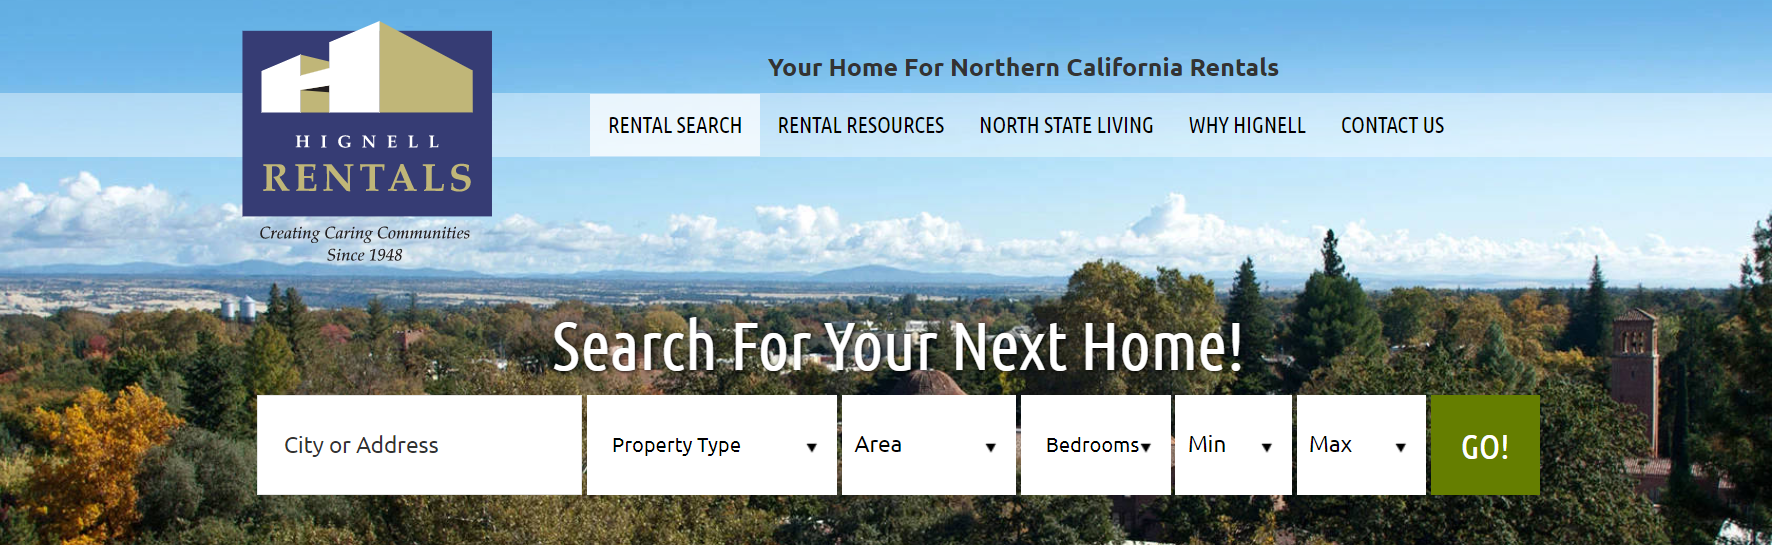 Hignell Rentals Chico Apartment Search Bar 